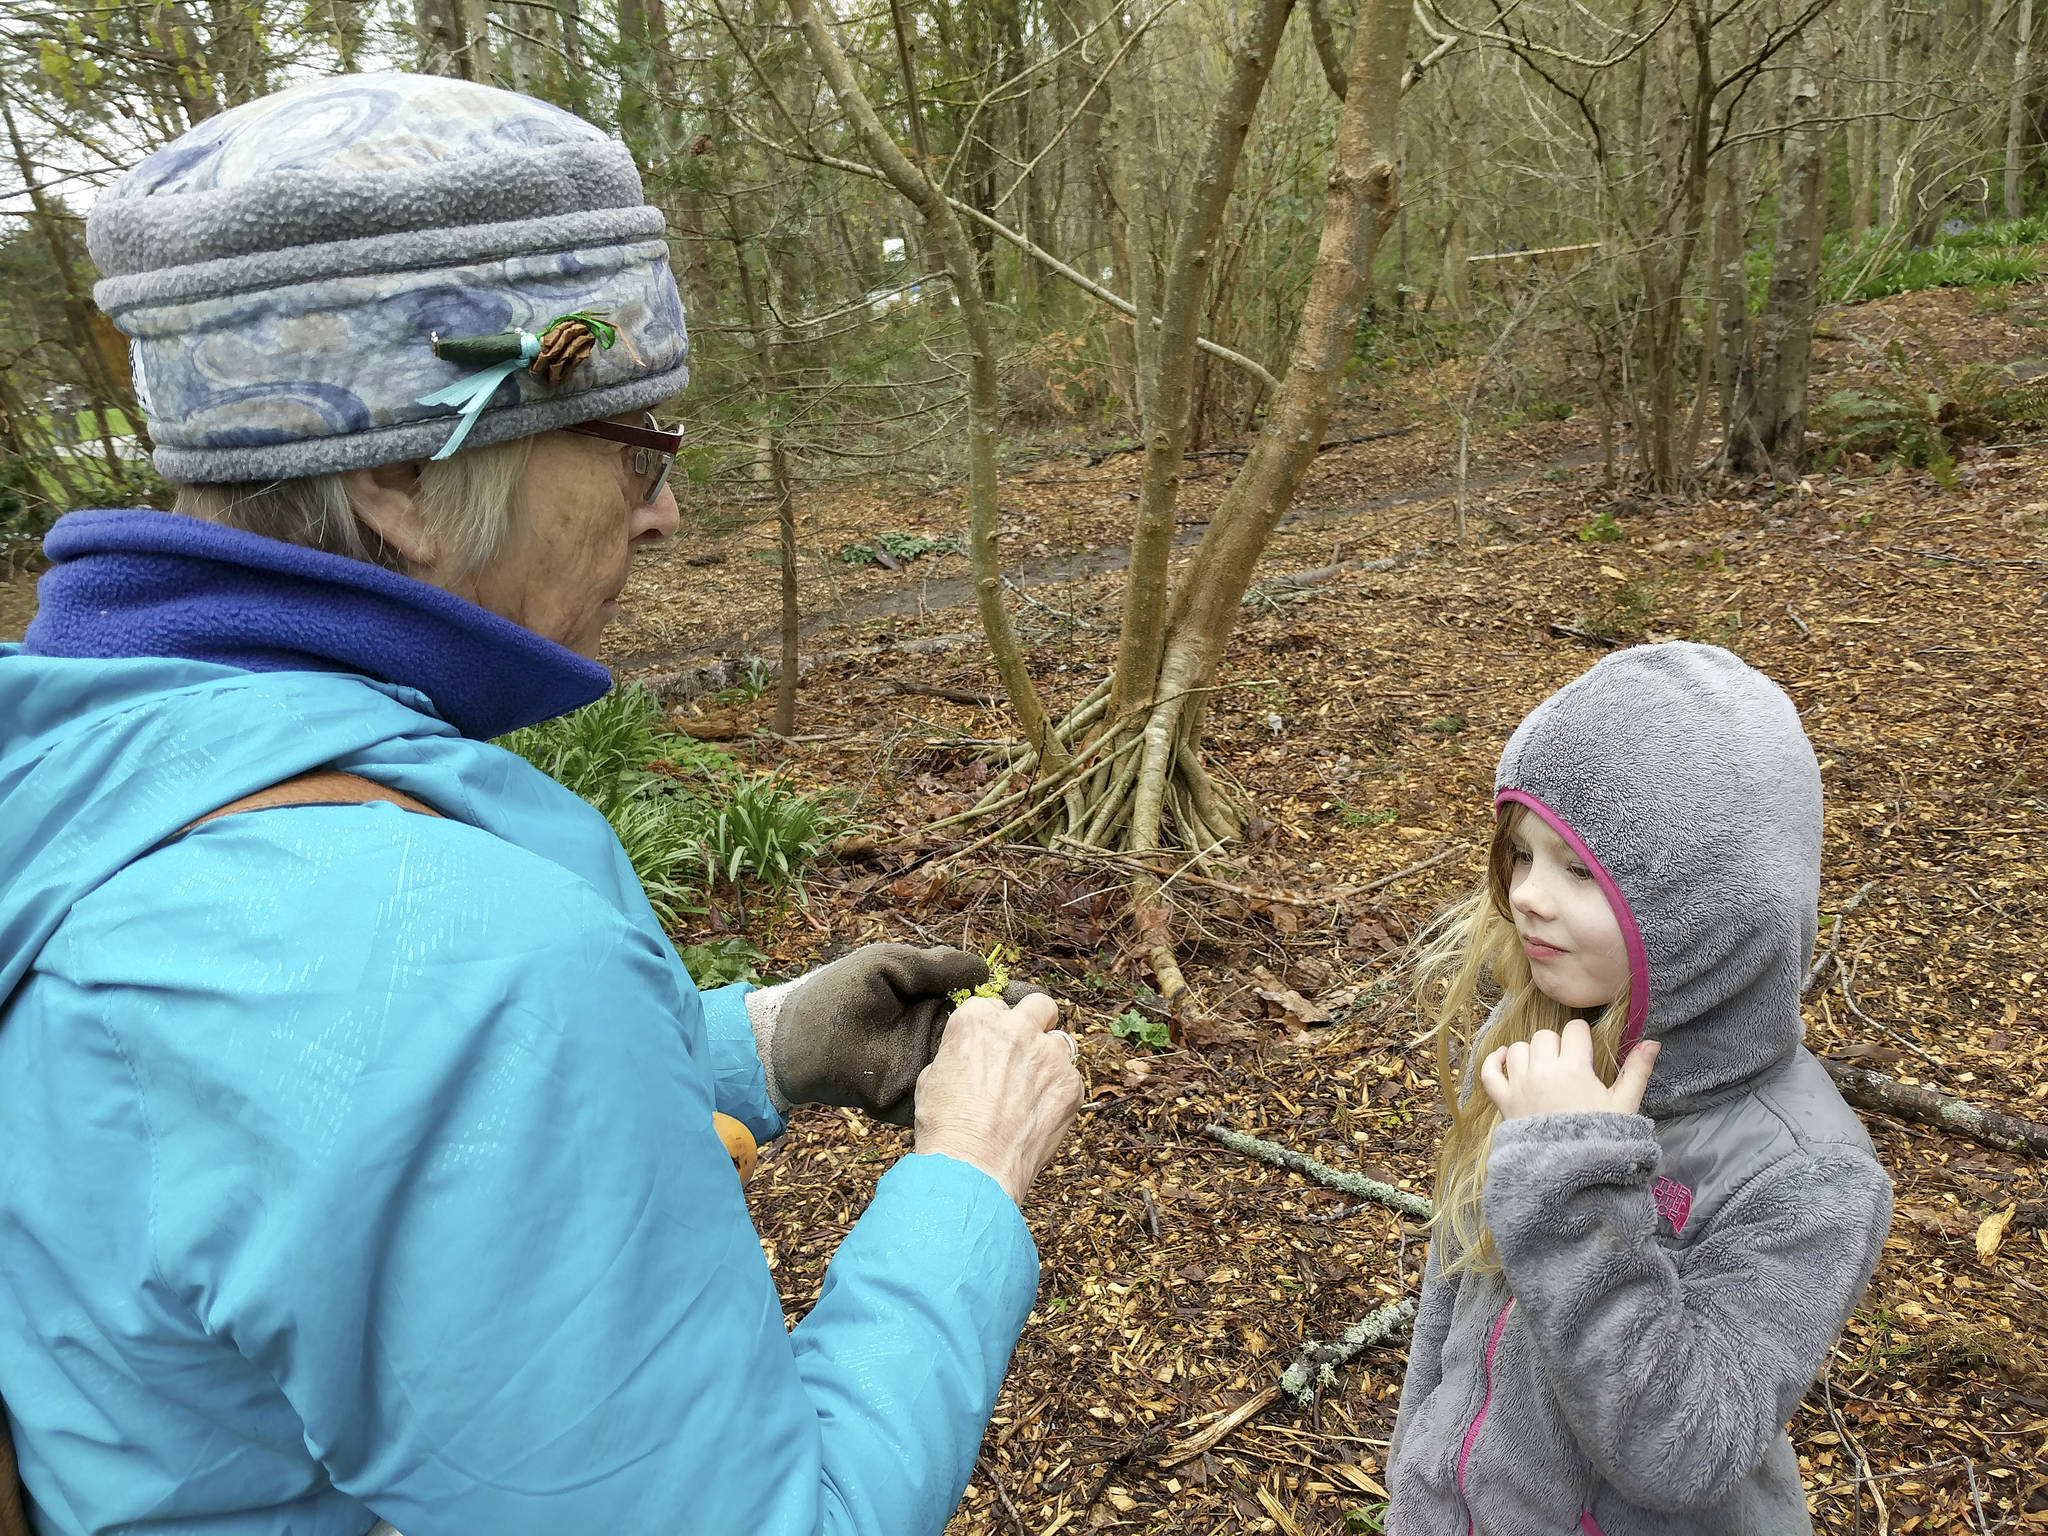 Six year old Laura Drake, who is so passionate about plants that she named her rescue cats Daisy and Daffodil, has been training as a Junior Naturalist in the Native Garden.